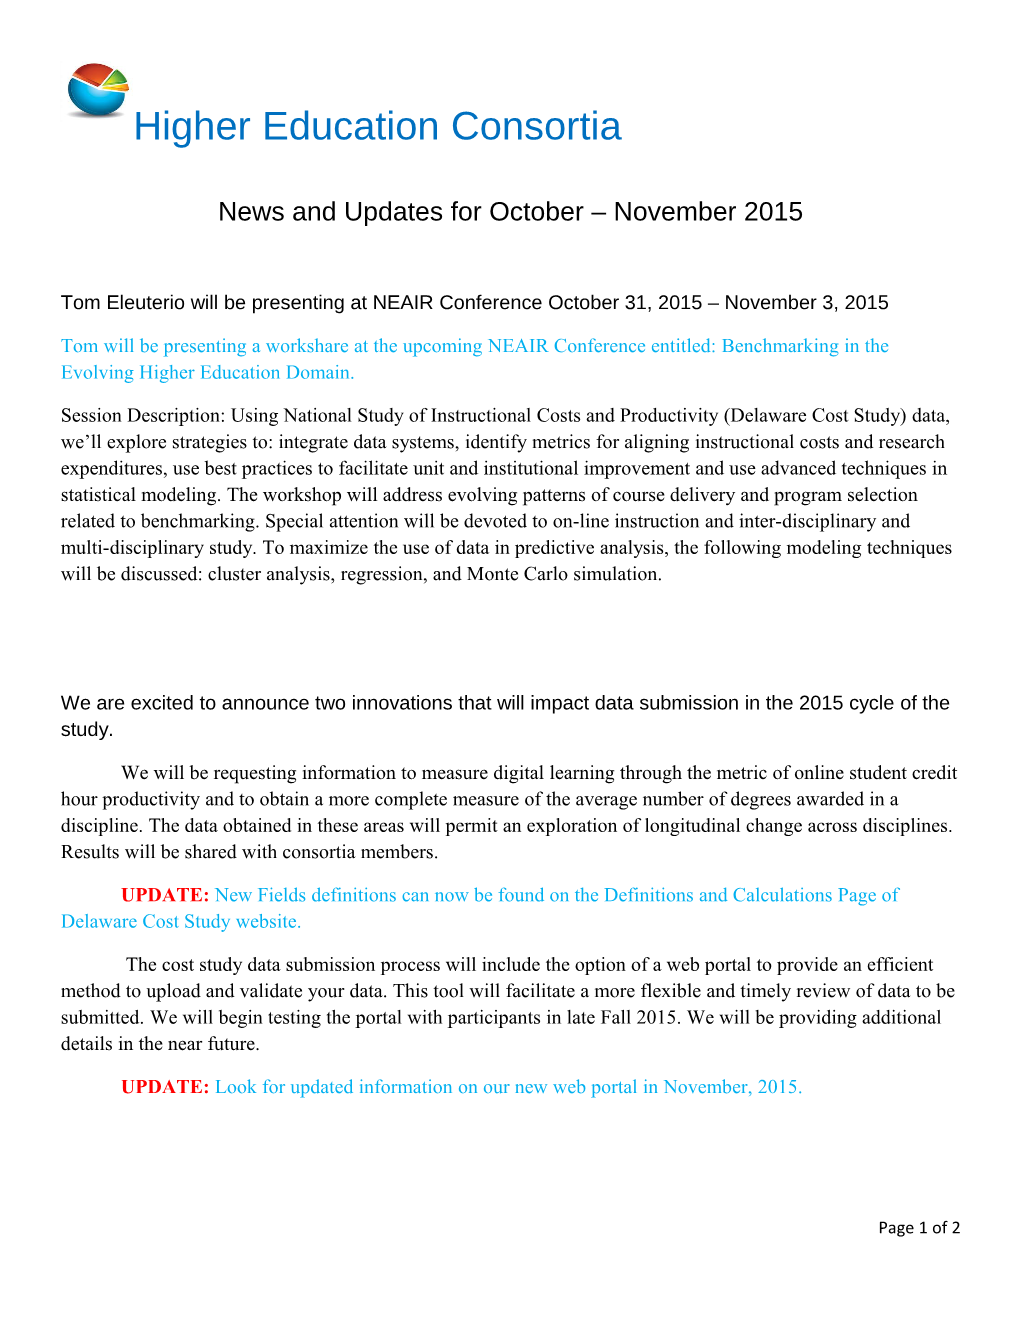 News and Updates for October November 2015